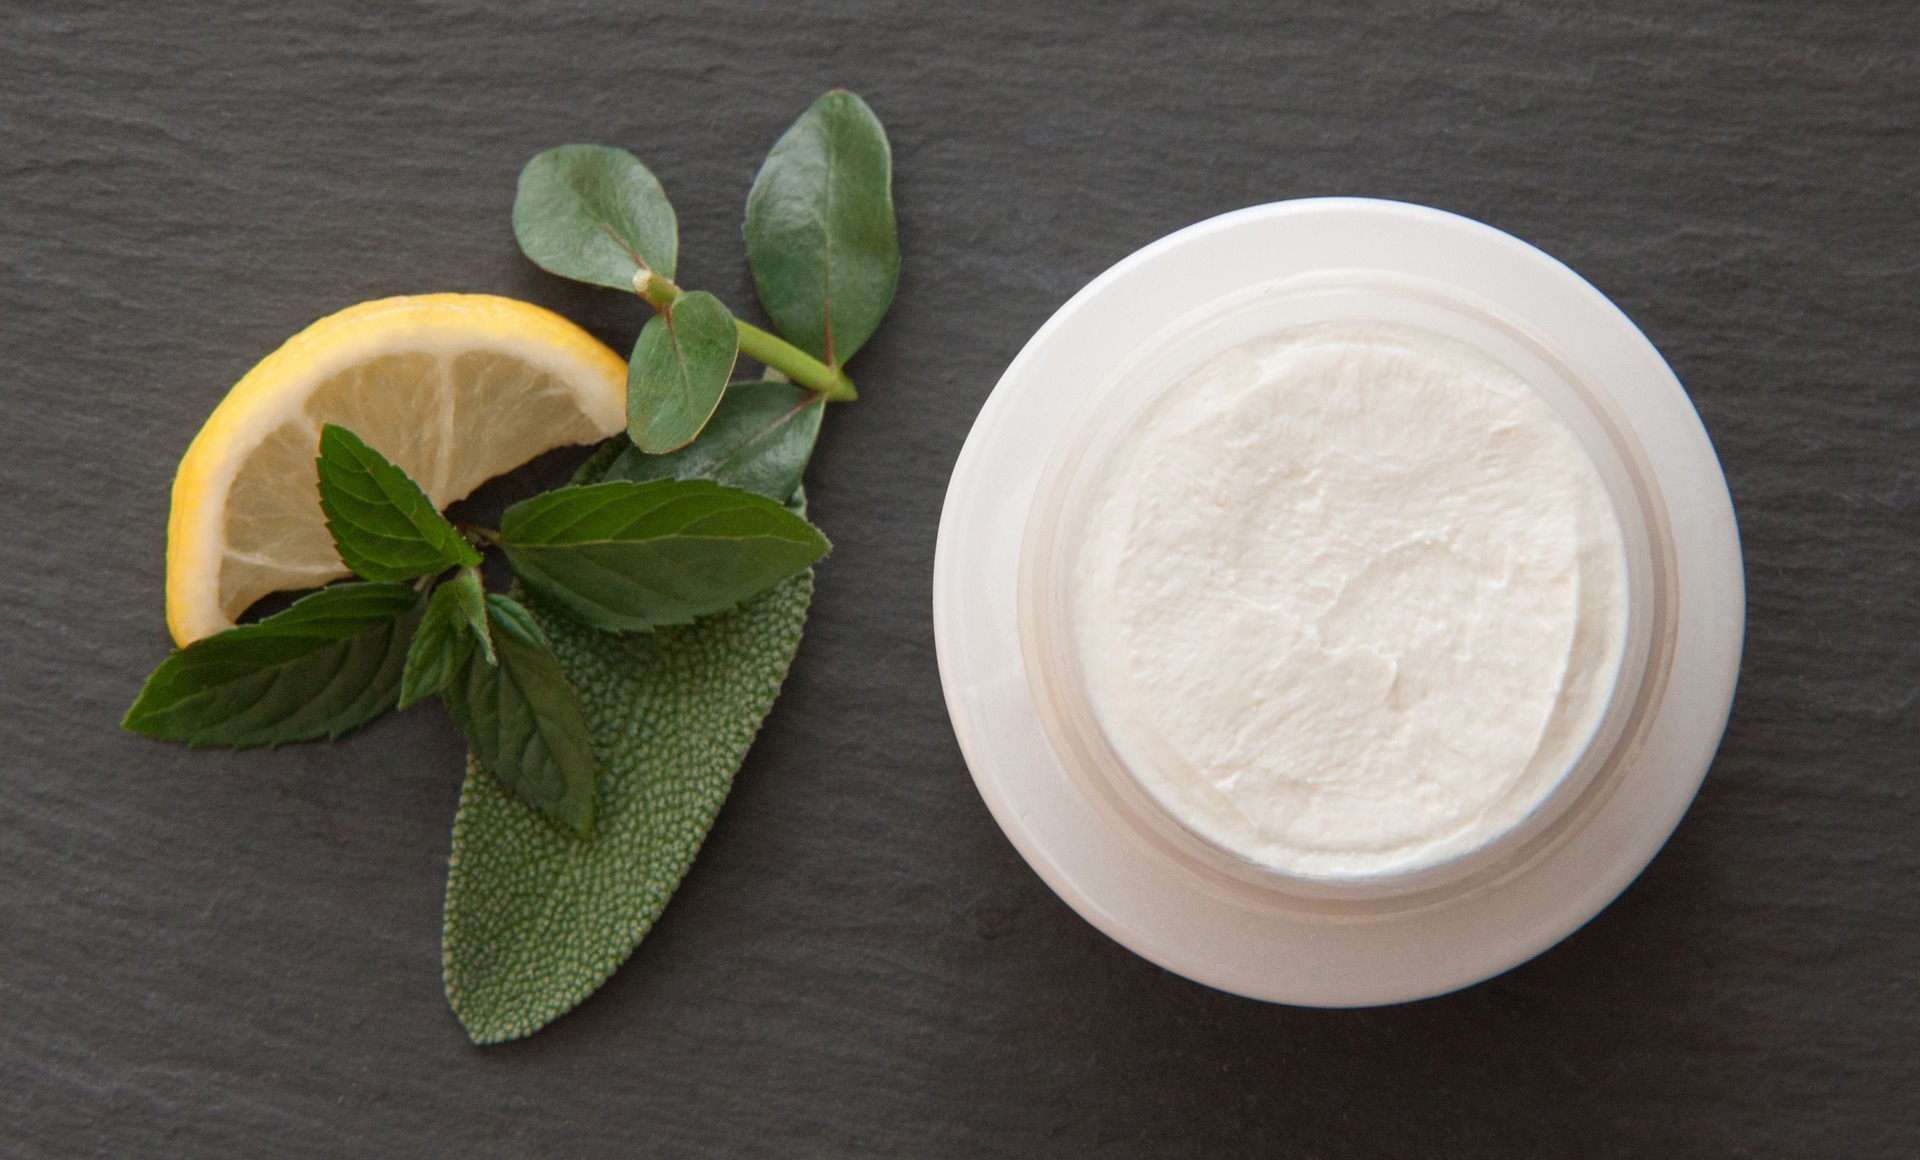 Why and how I make my own deodorant